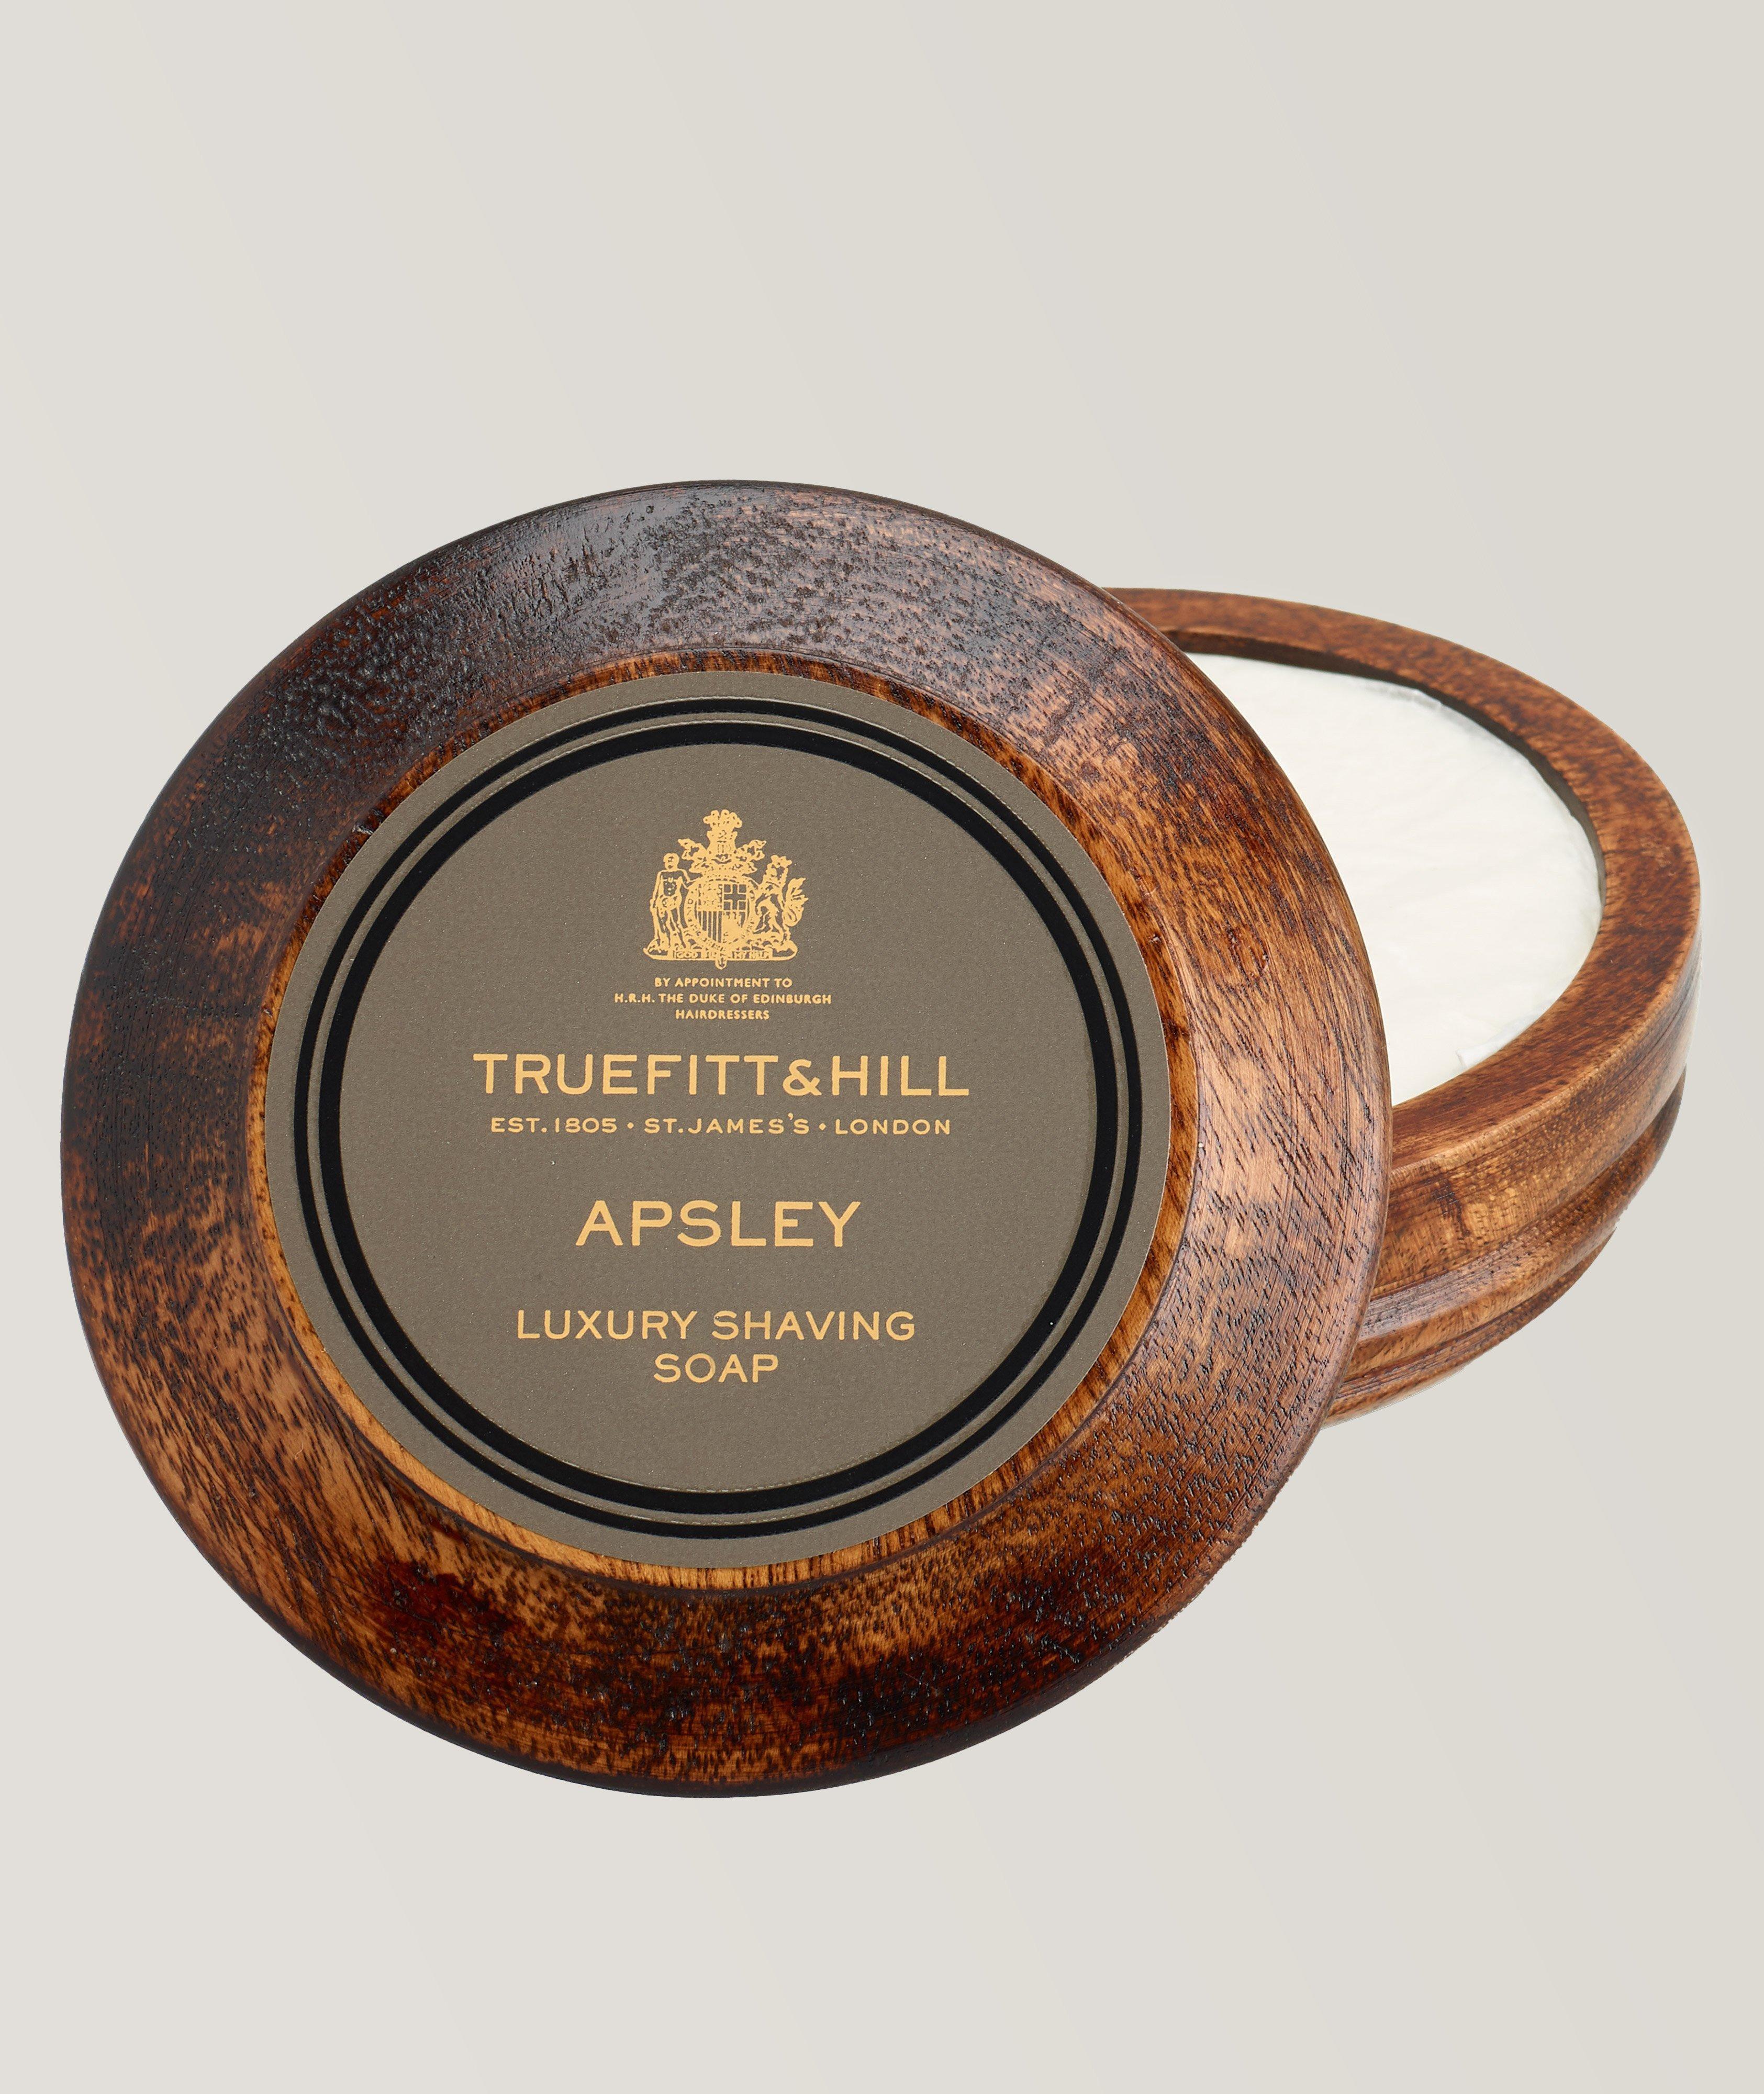 Apsley Shaving Soap in Wooden Bowl image 0